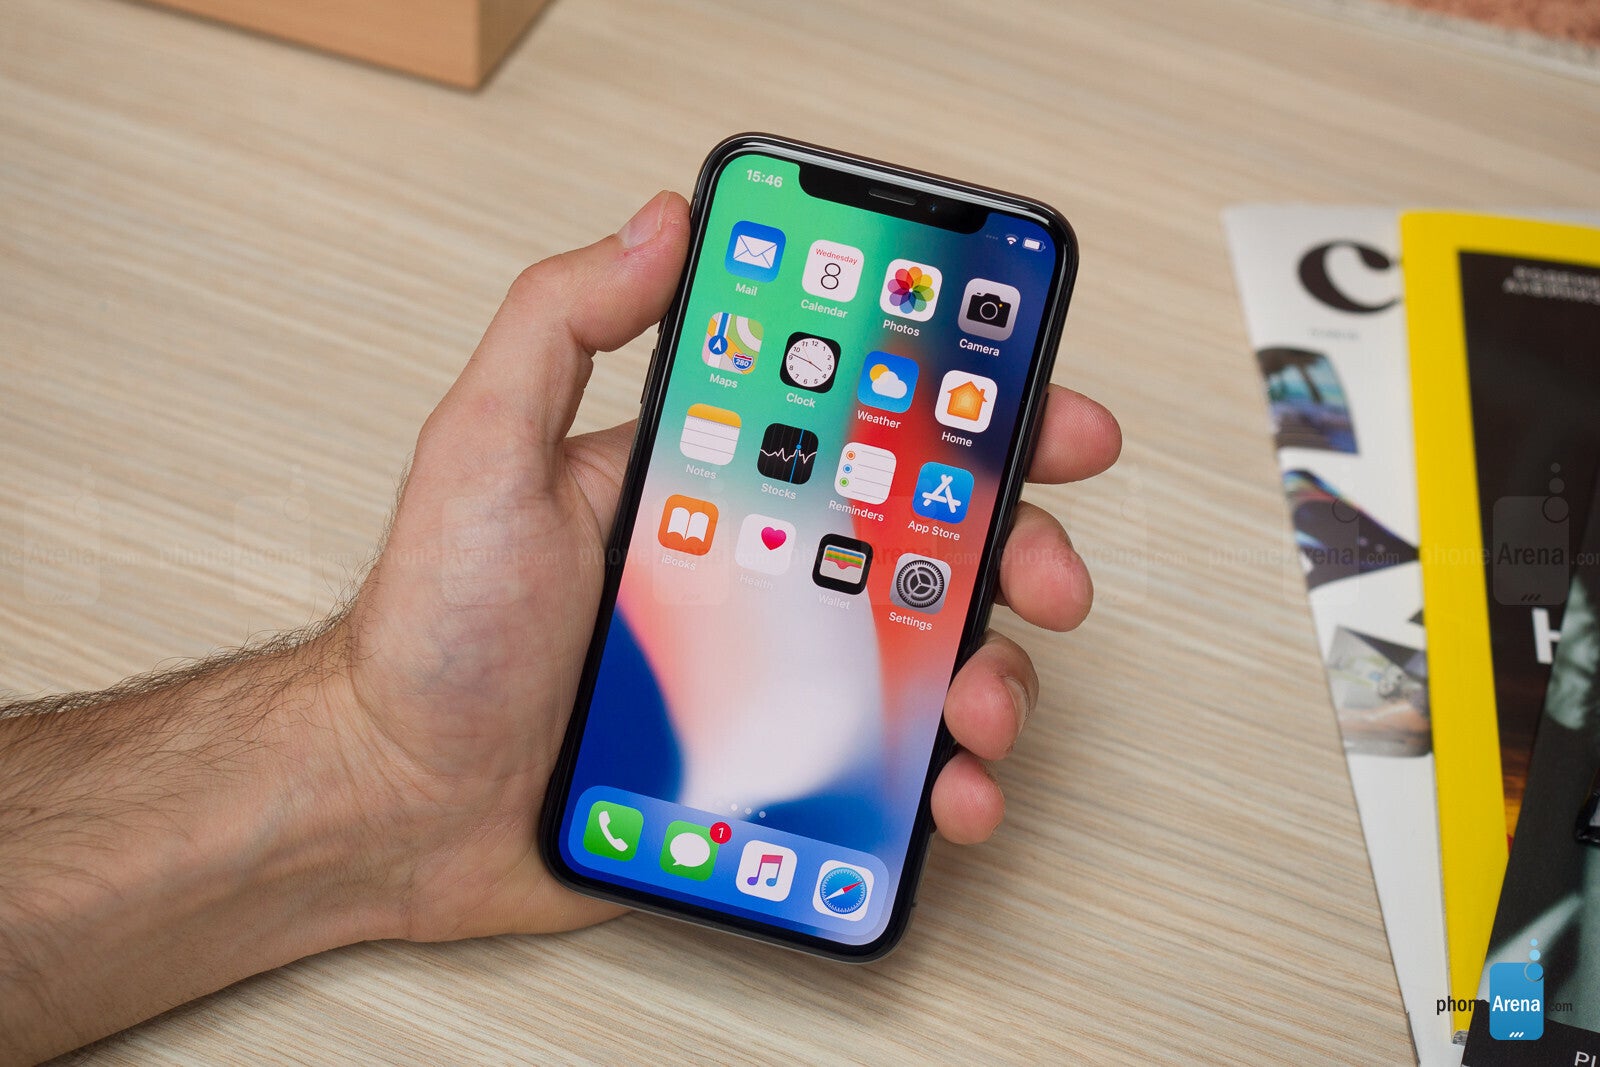 The iPhone X was the first Apple smartphone to come with a notch - iPhone 14 and Apple's clever way of modernizing it, while keeping it recognizable in a crowd of slab phones